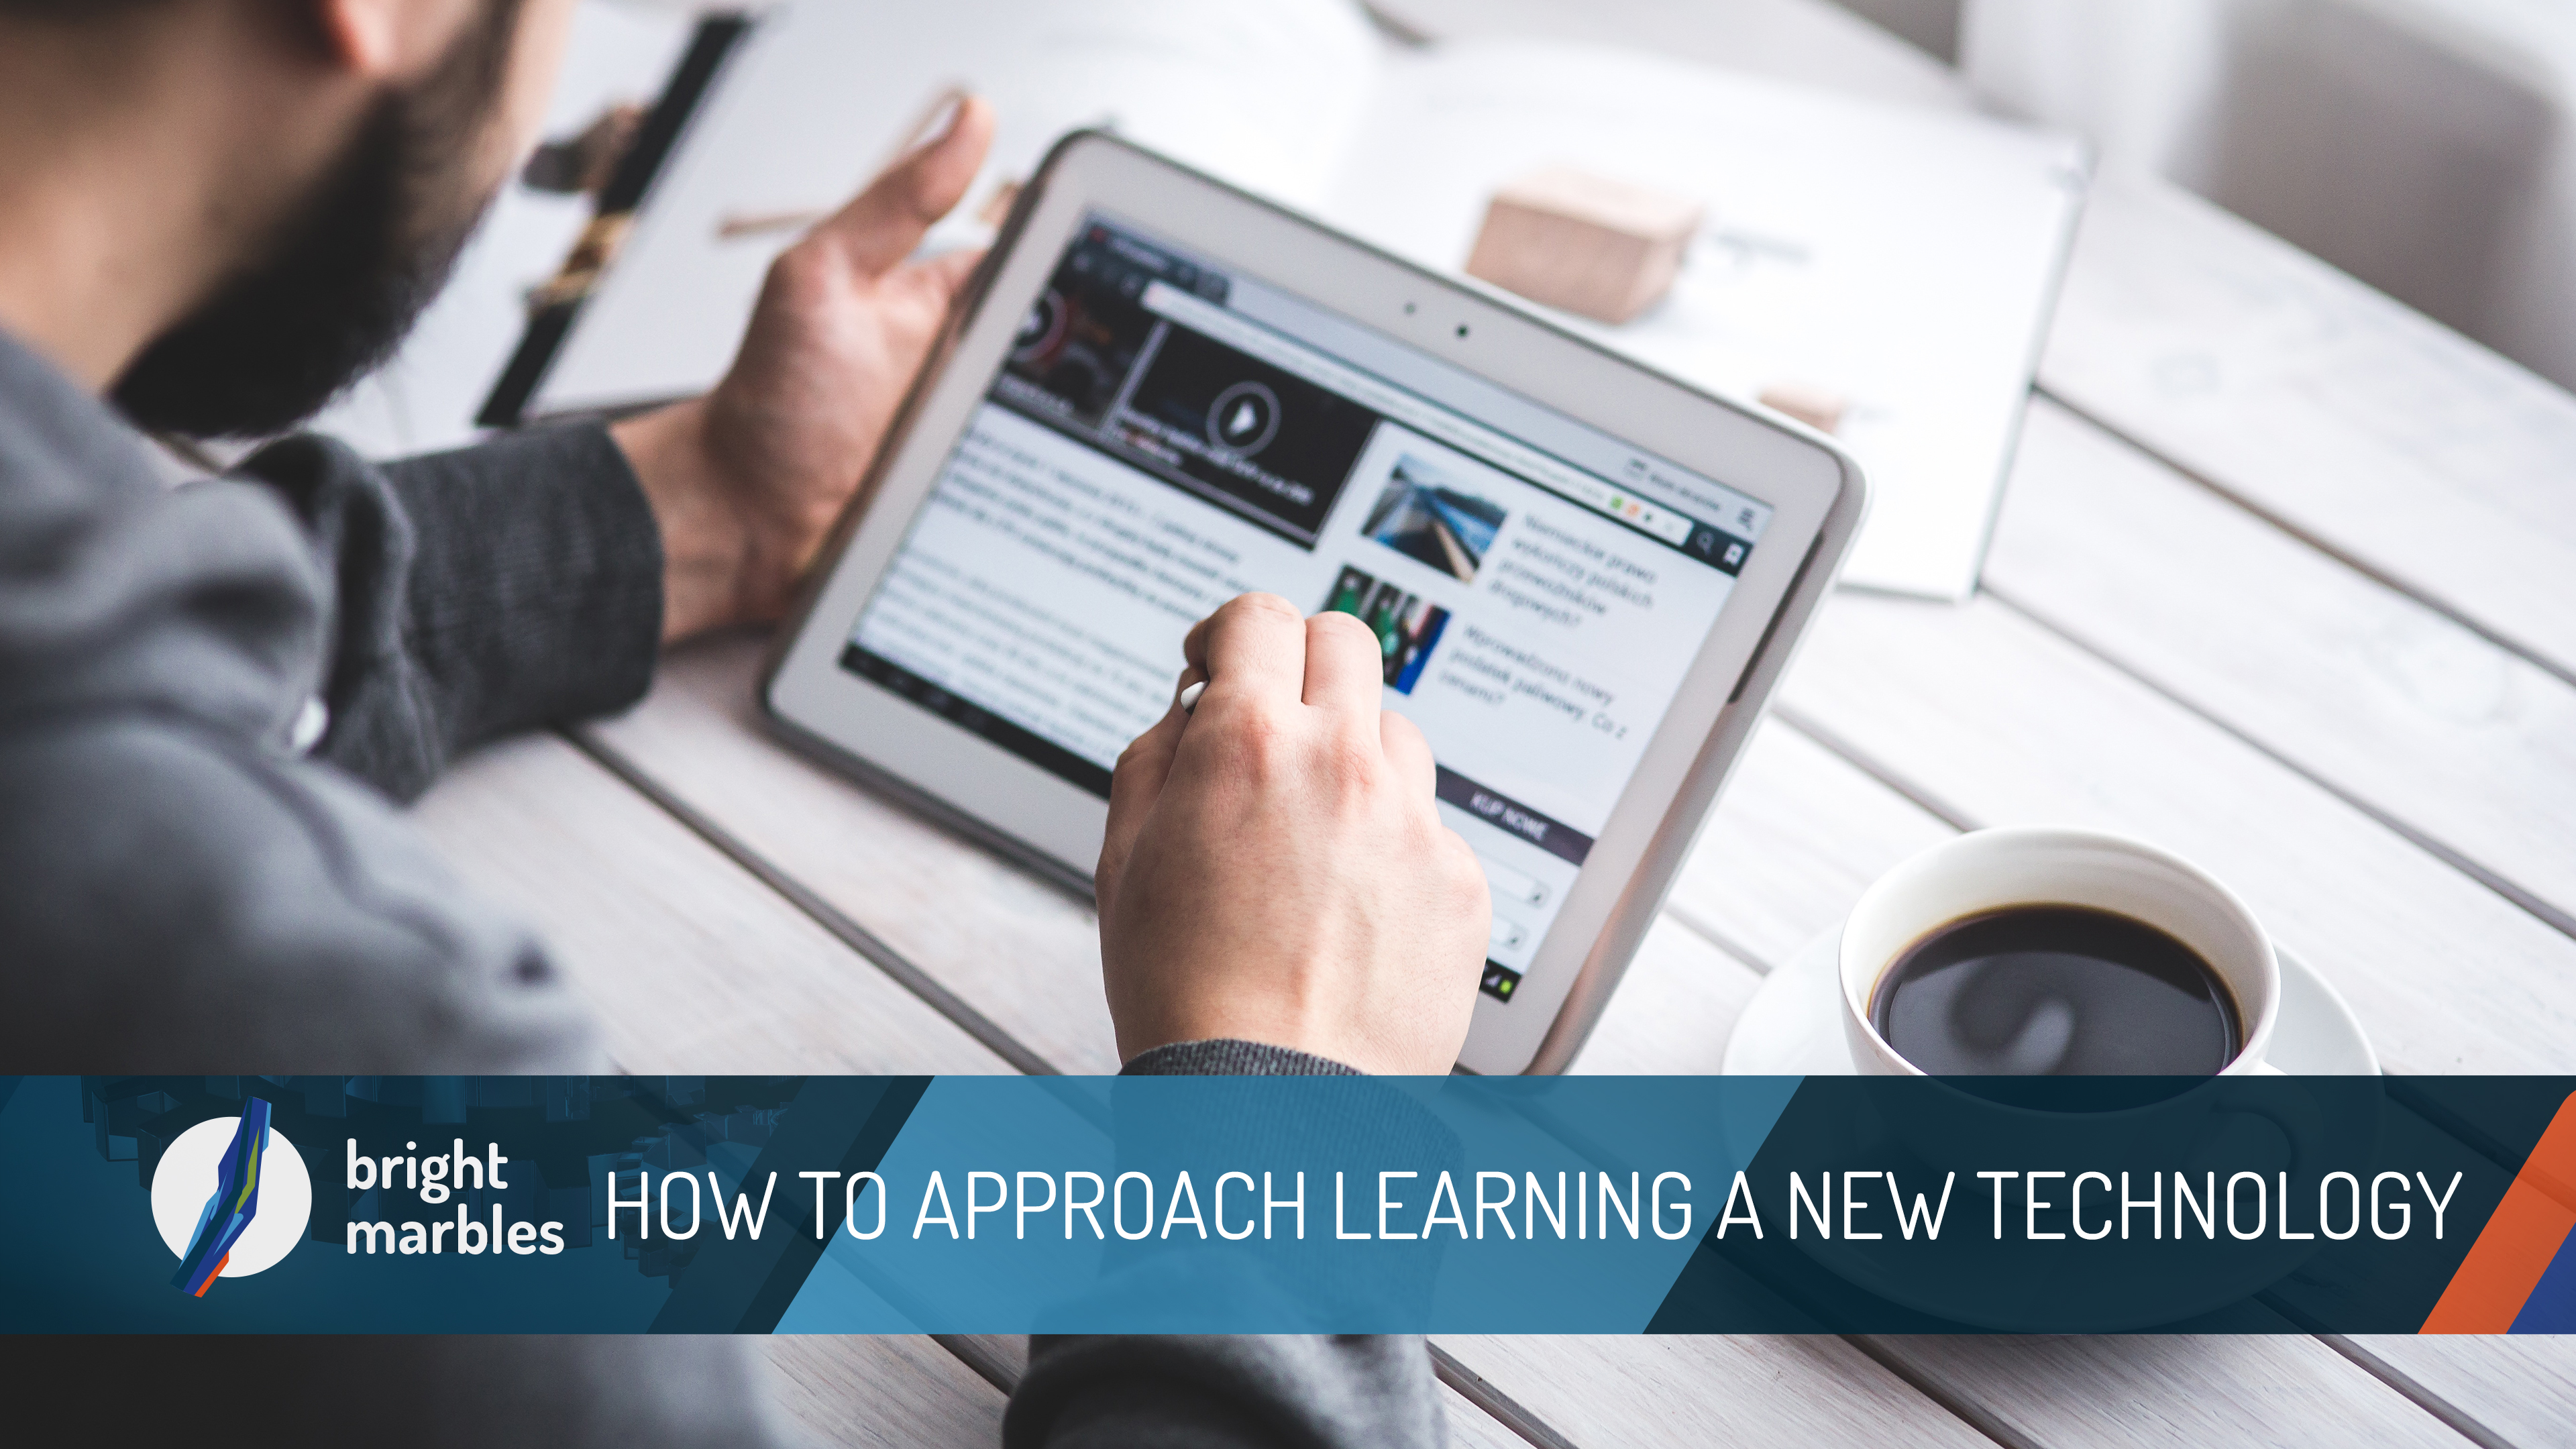 How to approach learning a new technology